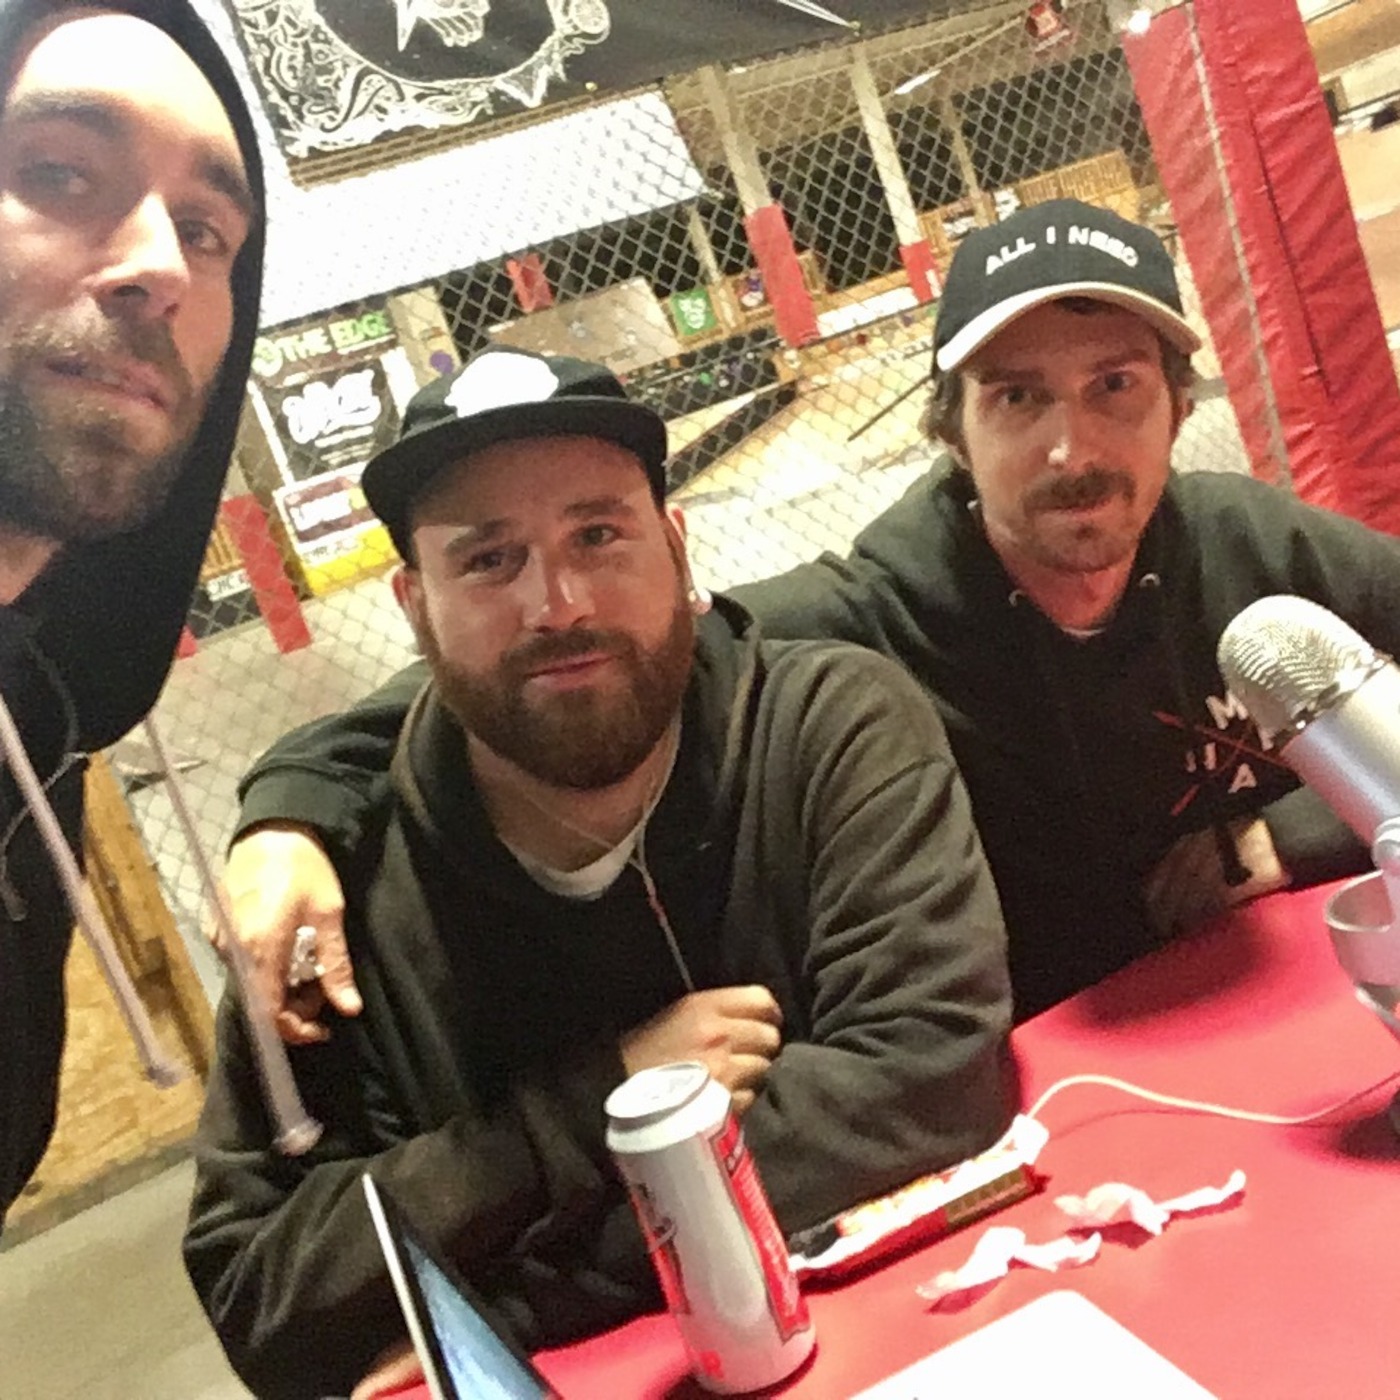 Episode 154: Birthday Podcast featuring Steven Ramsey Jr. and Jeff Telesmanick - ALL I NEED SKATE PODCAST